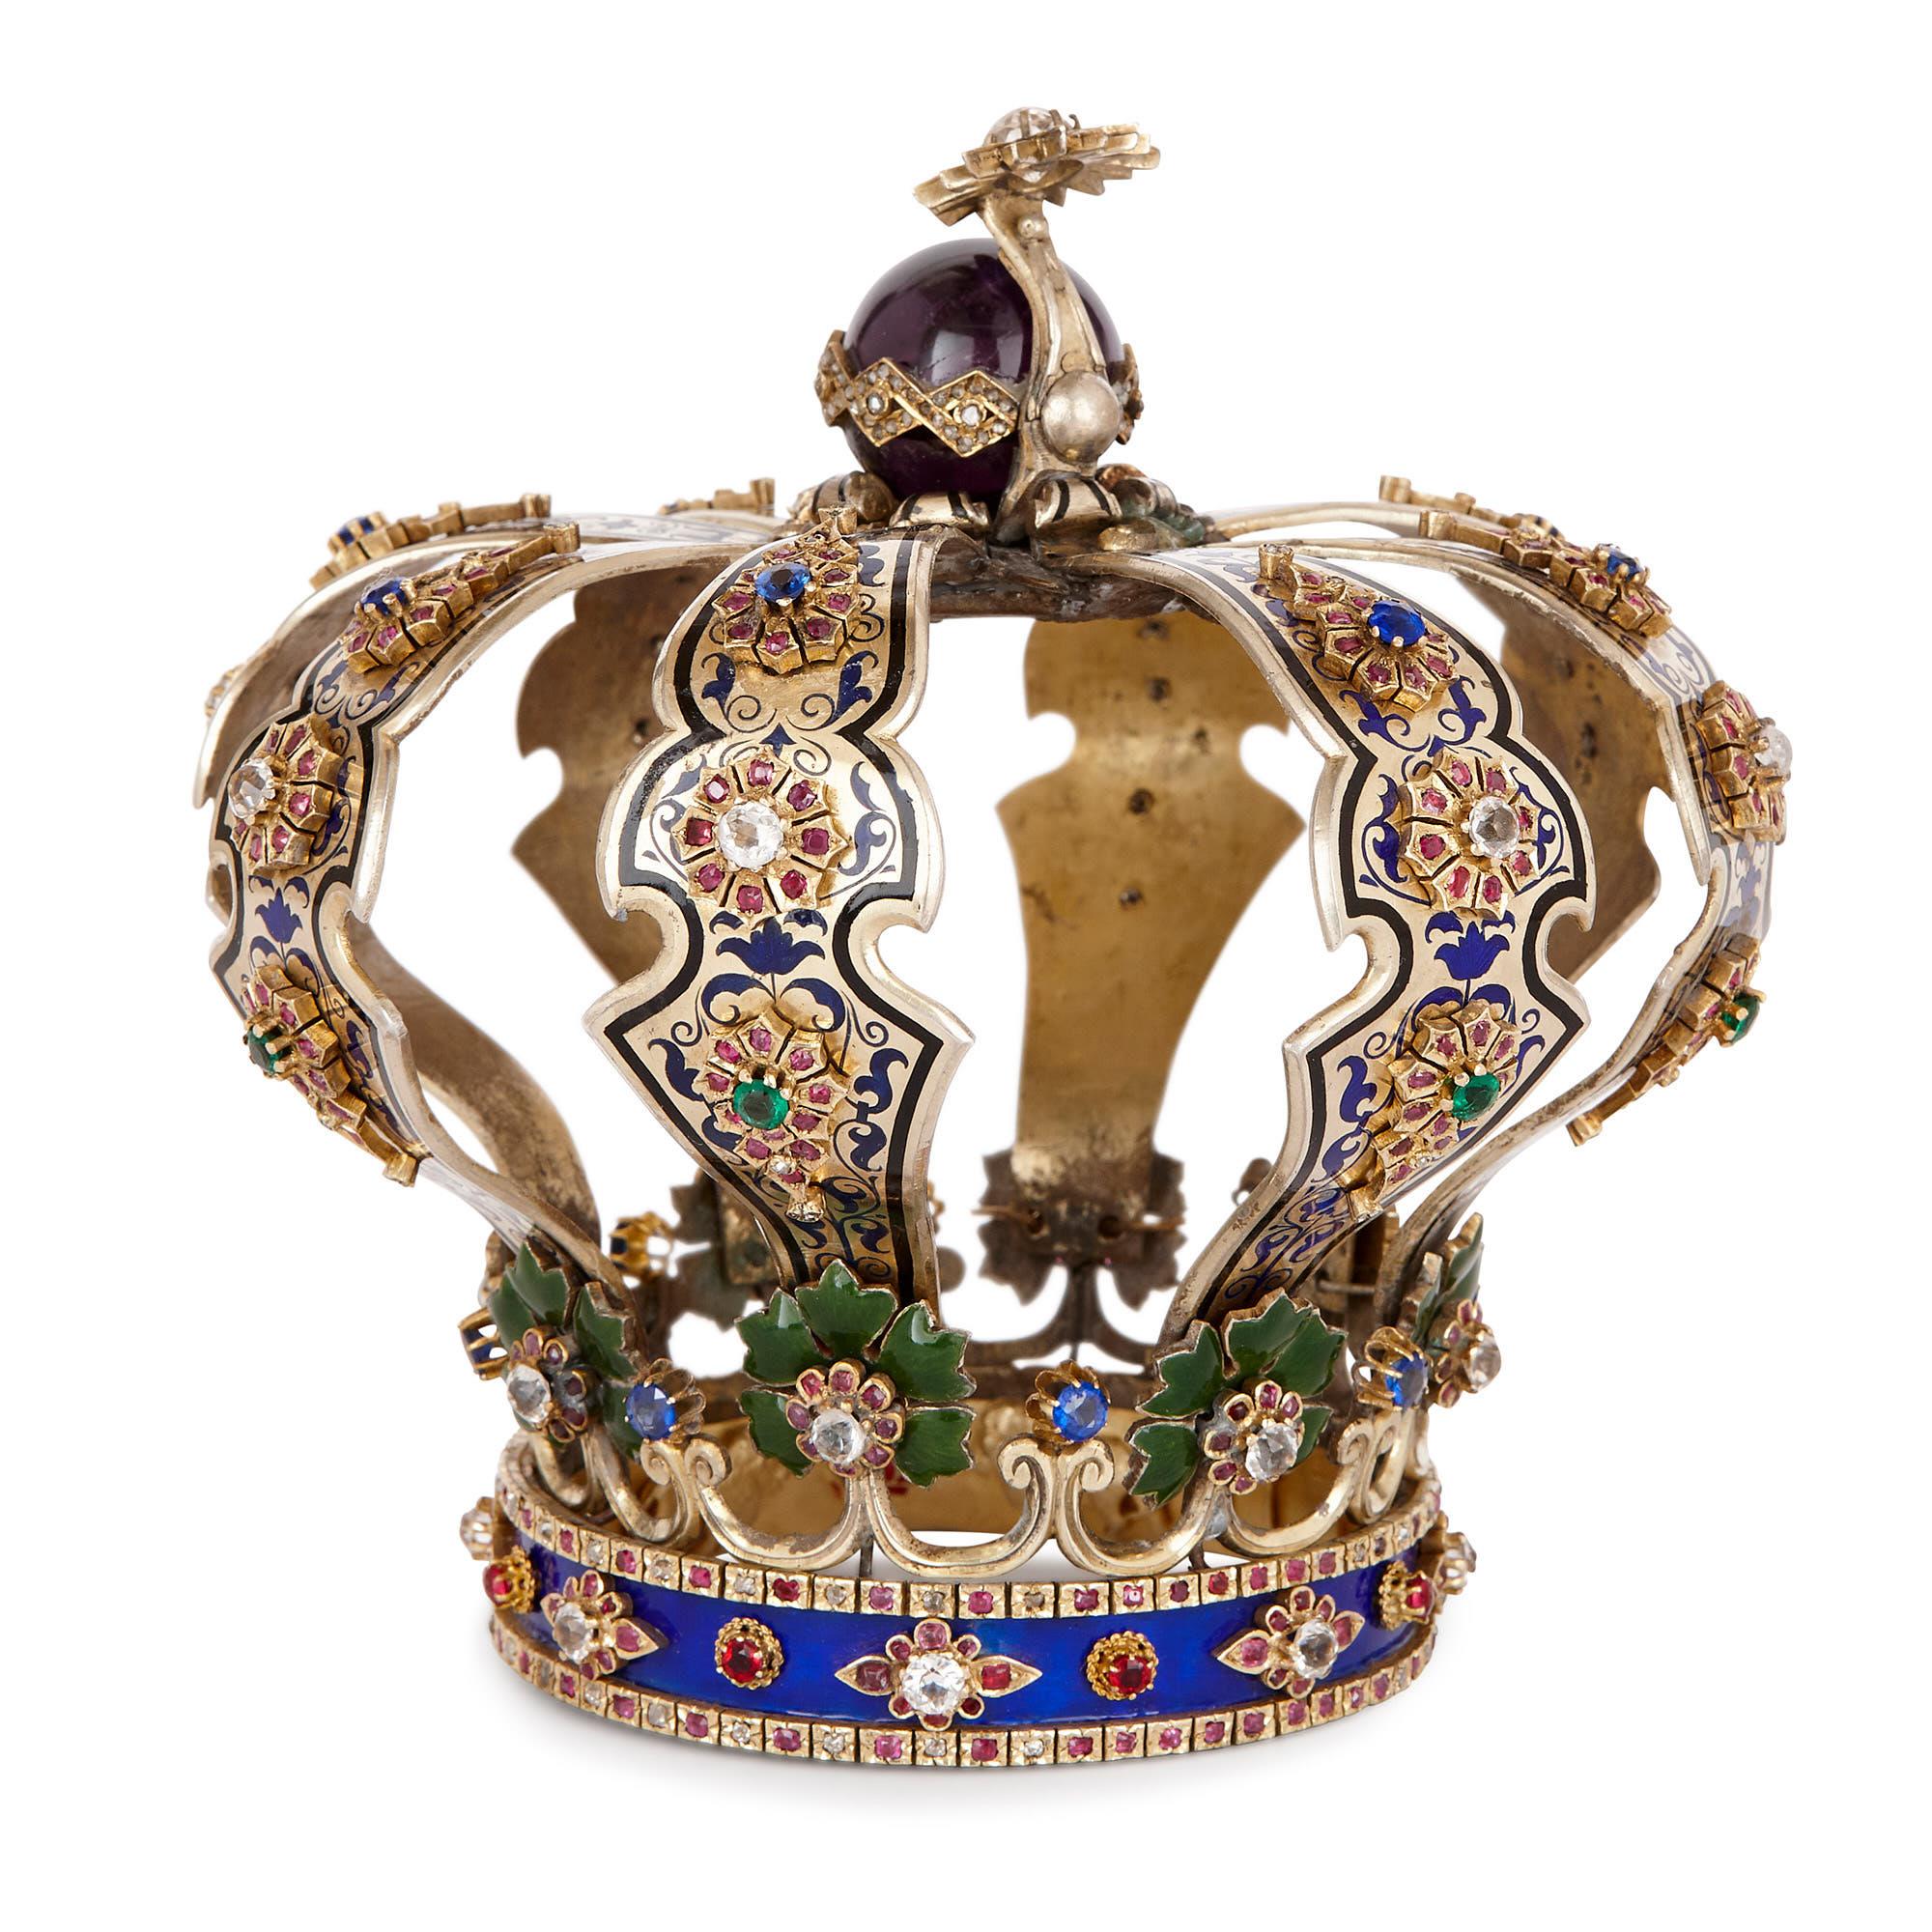 This Torah crown is a small (15cm high), exquisitely-crafted and lavishly-decorated piece of Judaica. 

The Torah – the first of five books of the Hebrew Bible – is central to the Jewish faith. It is written onto a scroll, which is wound in